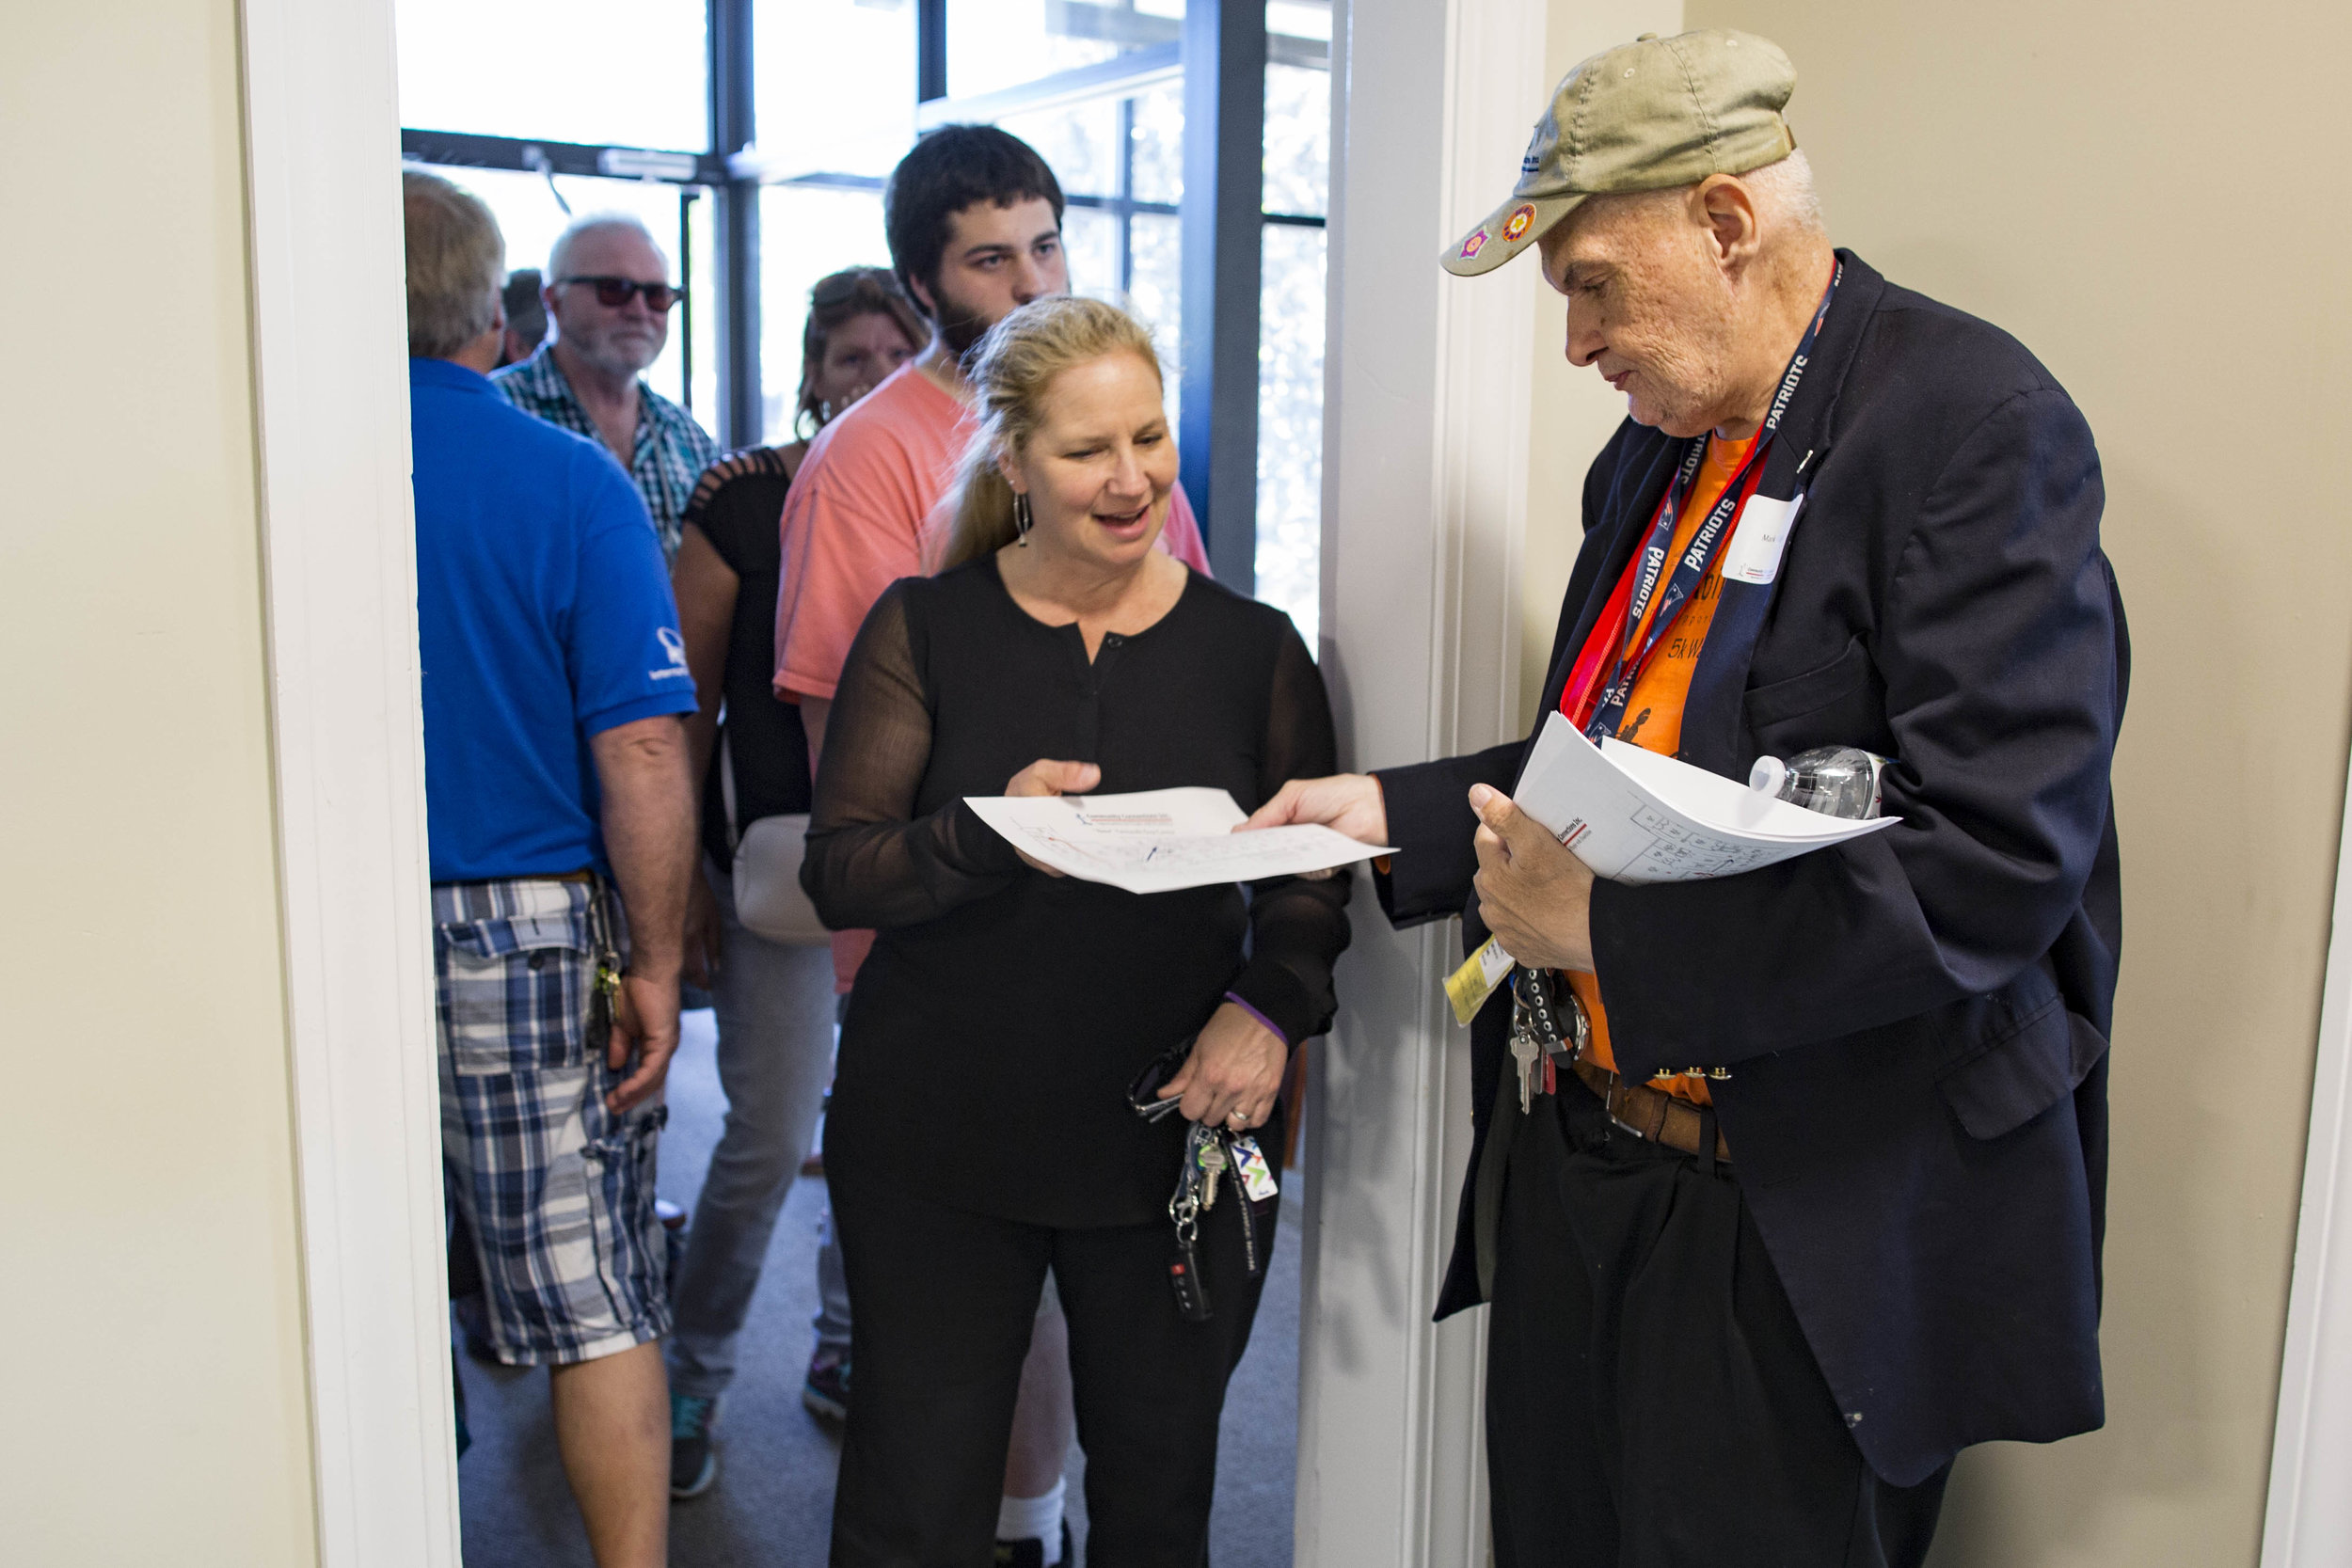  Client Mark Curran greets guests and hands out maps during the Community Connections new building grand opening on June 21, 2017.   